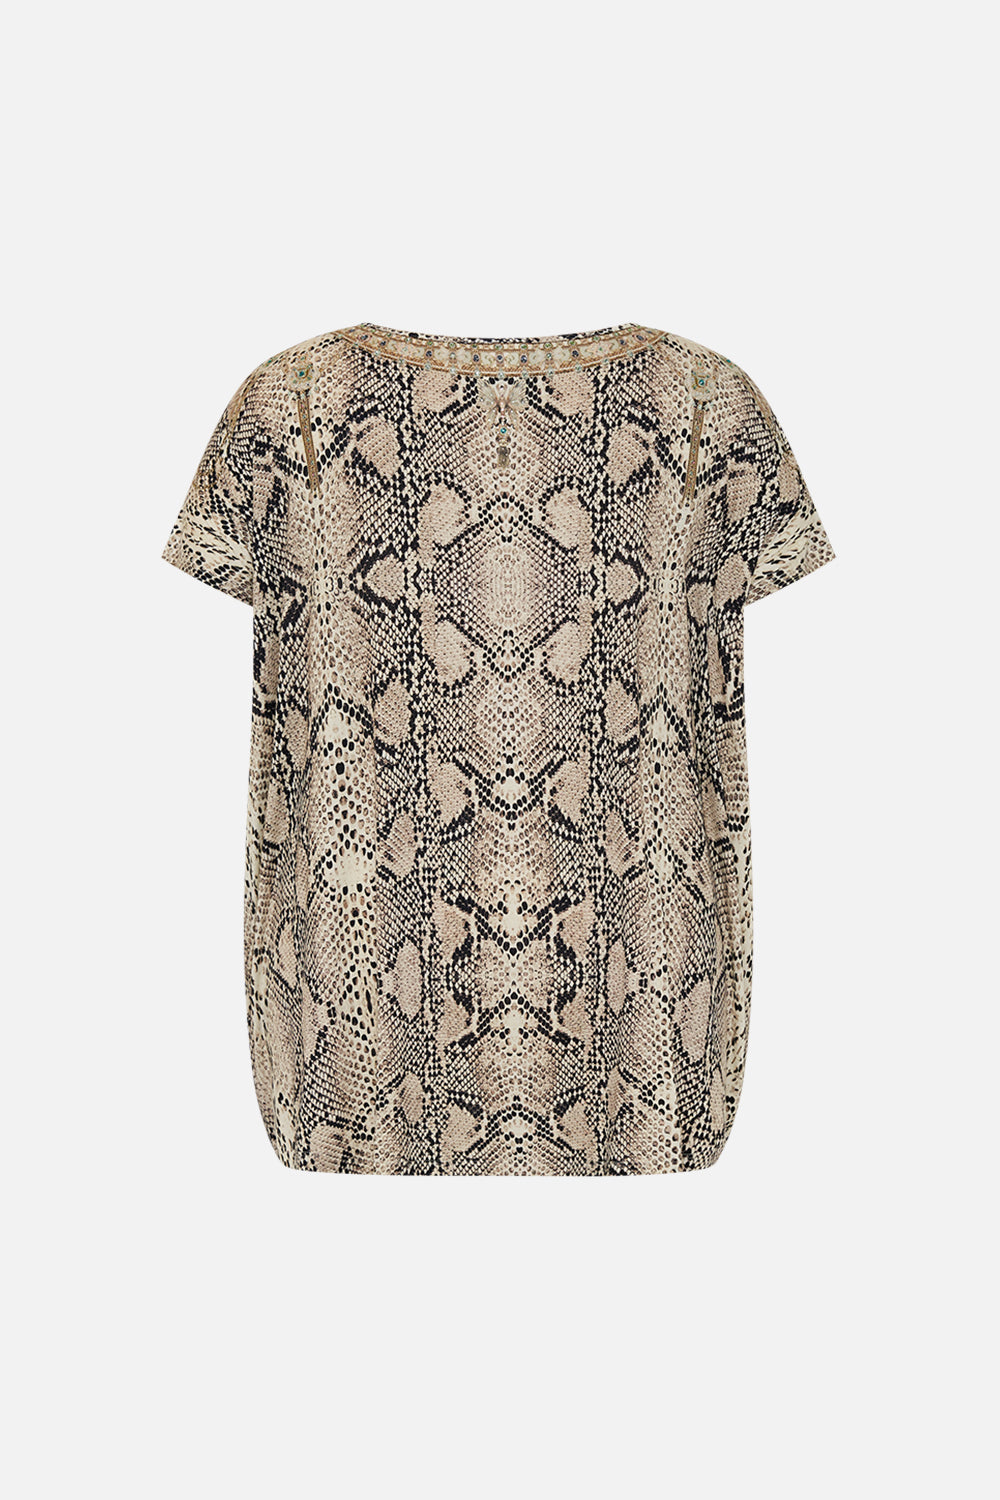 CAMILLA loose fit graphic tee in Looking Glass Houses print